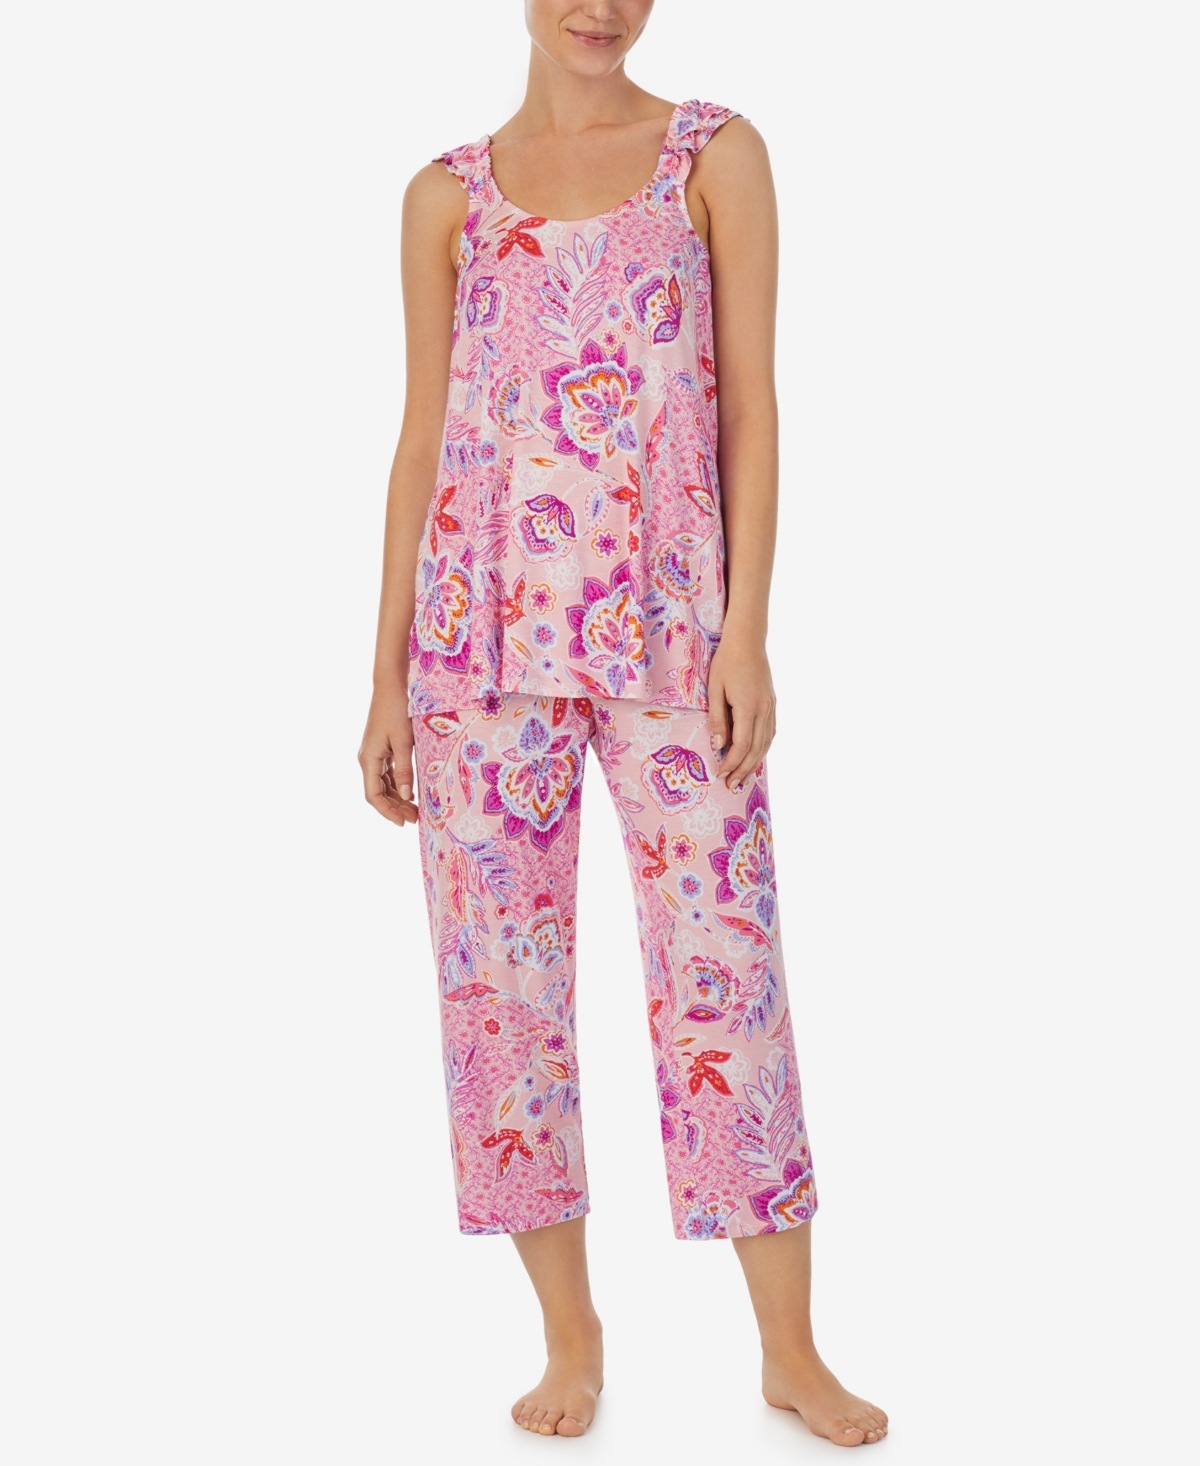 Shop Ellen Tracy Women's Sleeveless Top And Cropped Pants 2-pc. Pajama Set In Pink Floral